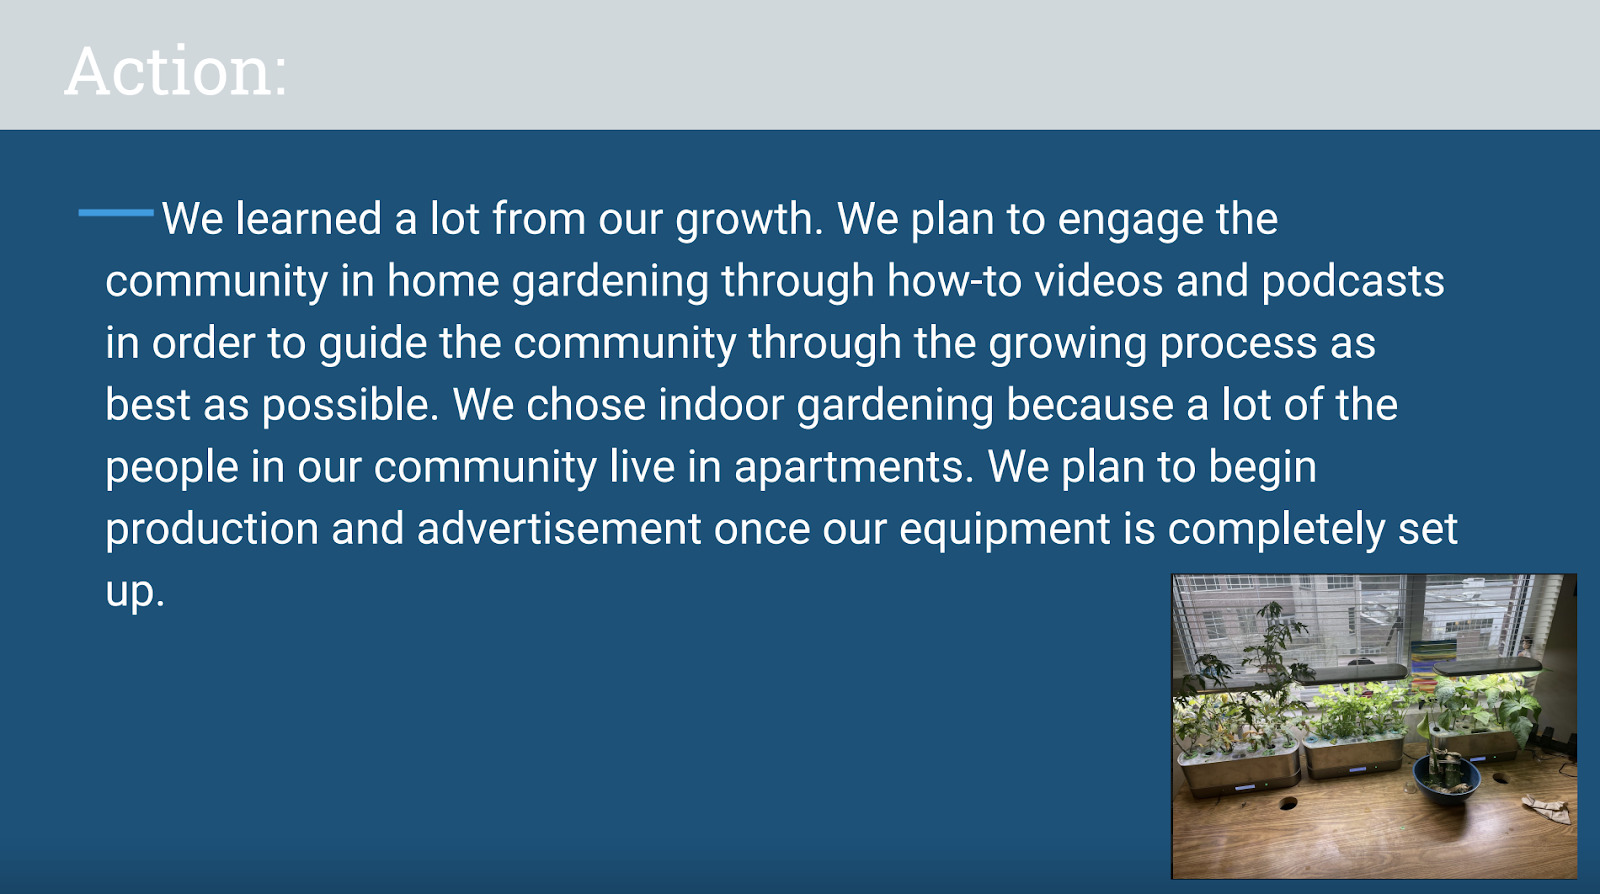 Slide with image of vegetable garden on windowsill and text: “We learned a lot from our growth. We plan to engage the community in home gardening through how-to videos and podcasts in order to guide the community through the growing process as best as possible. We chose indoor gardening because a lot of the people in our community live in apartments. We plan to begin production and advertisement once our equipment is completely set up.” 